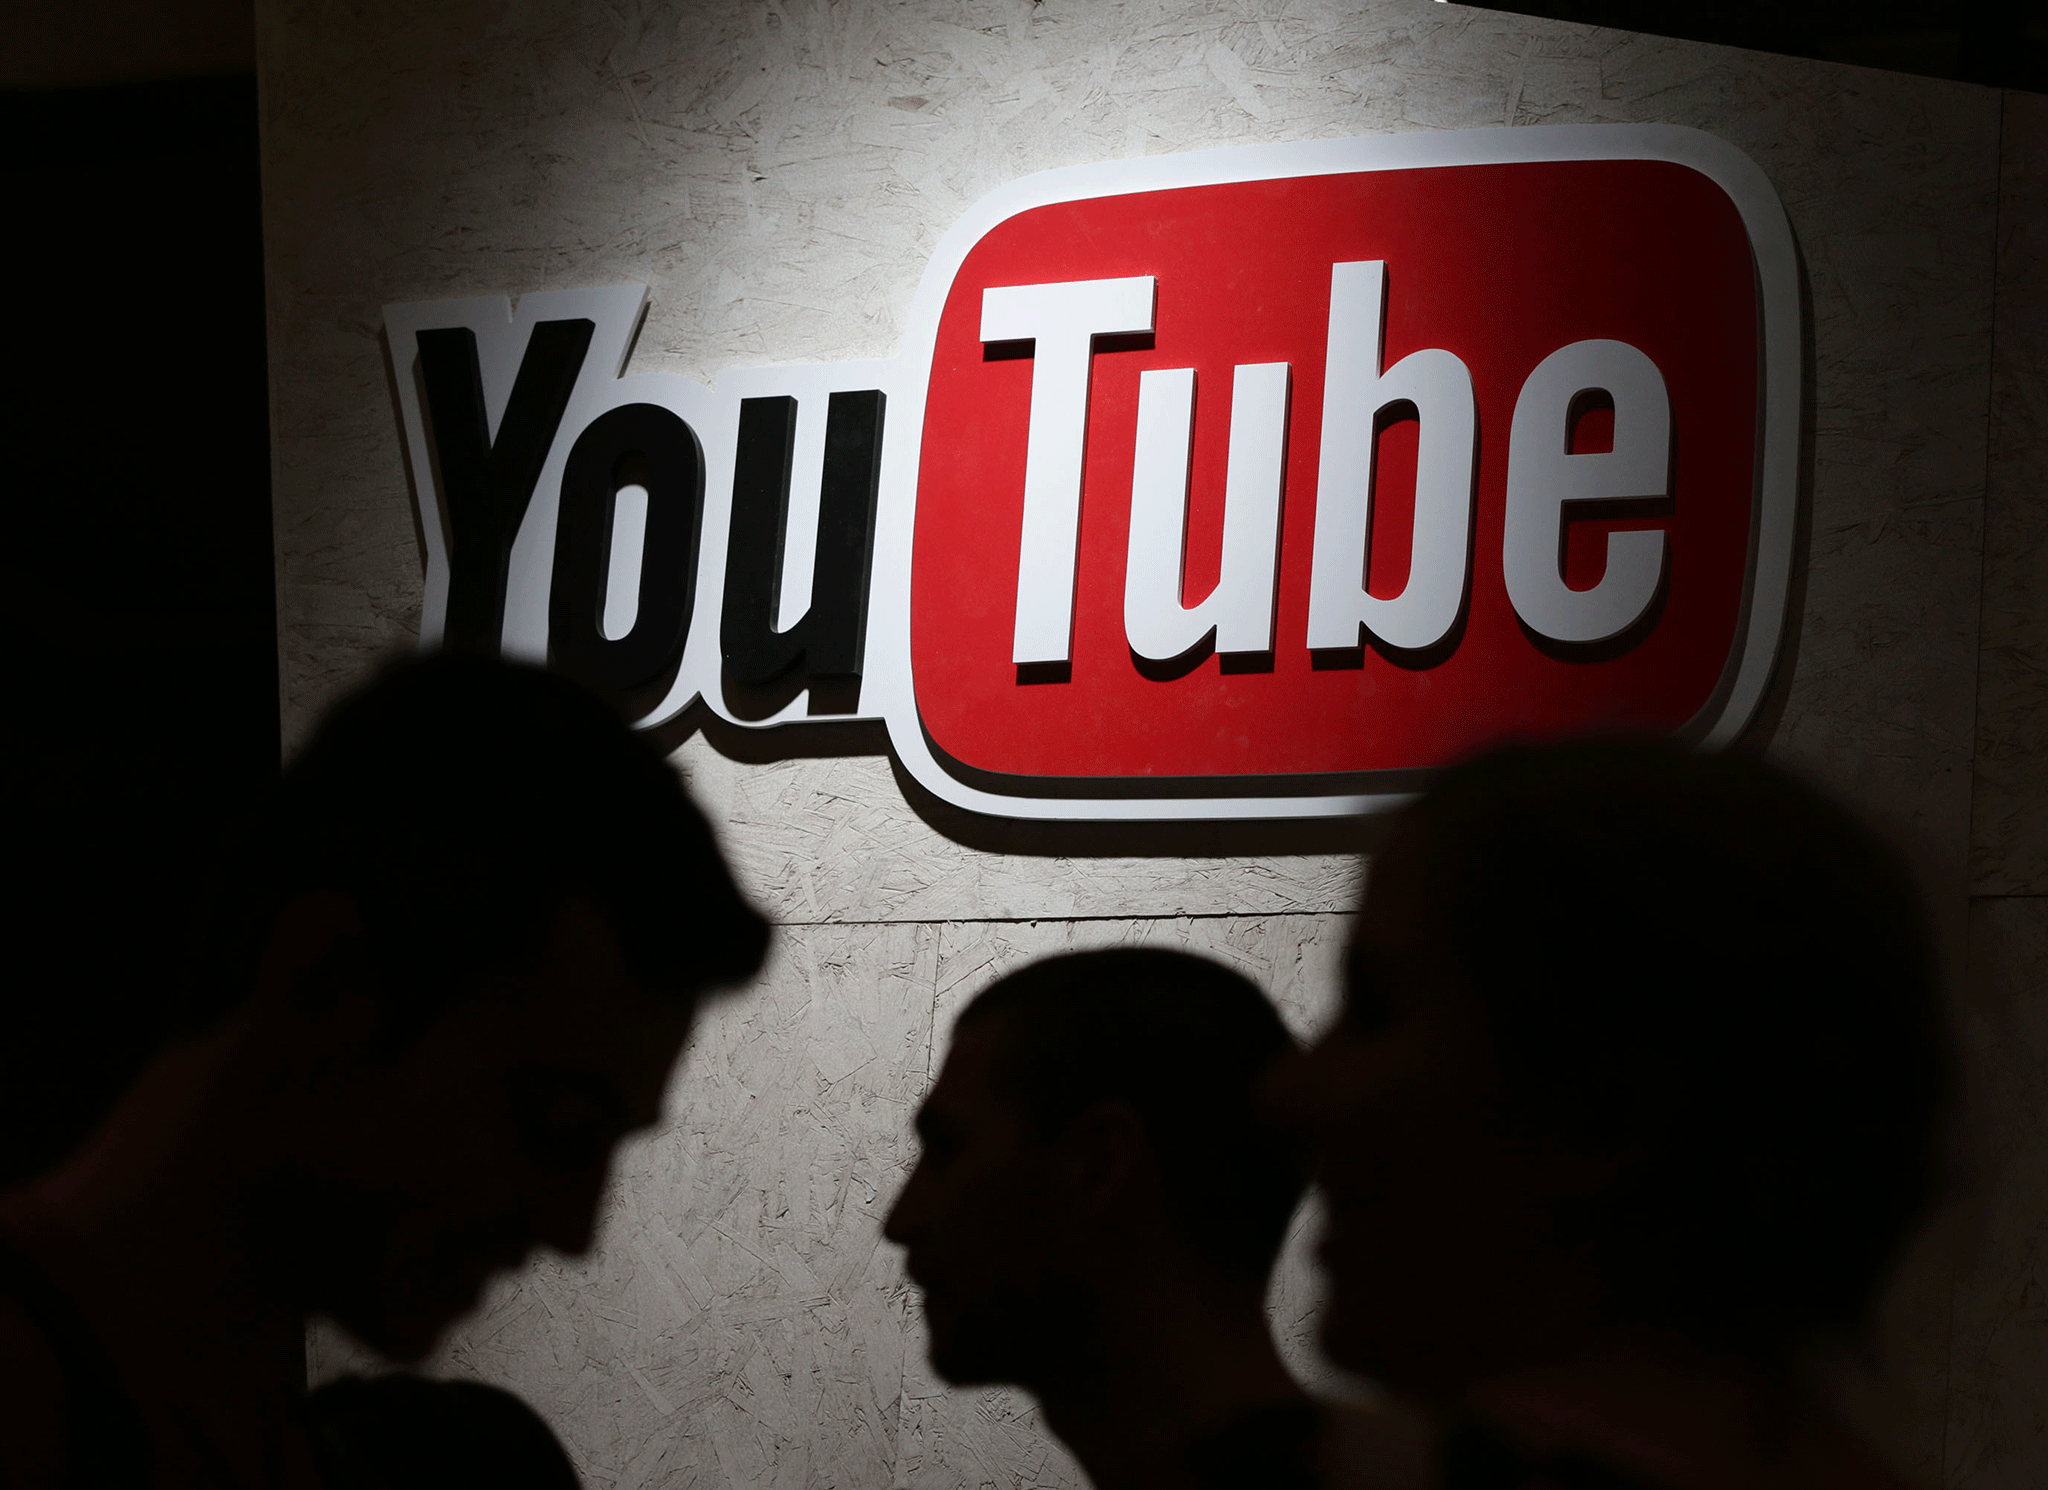 Google vows crackdown on extremist YouTube videos in wake of attacks